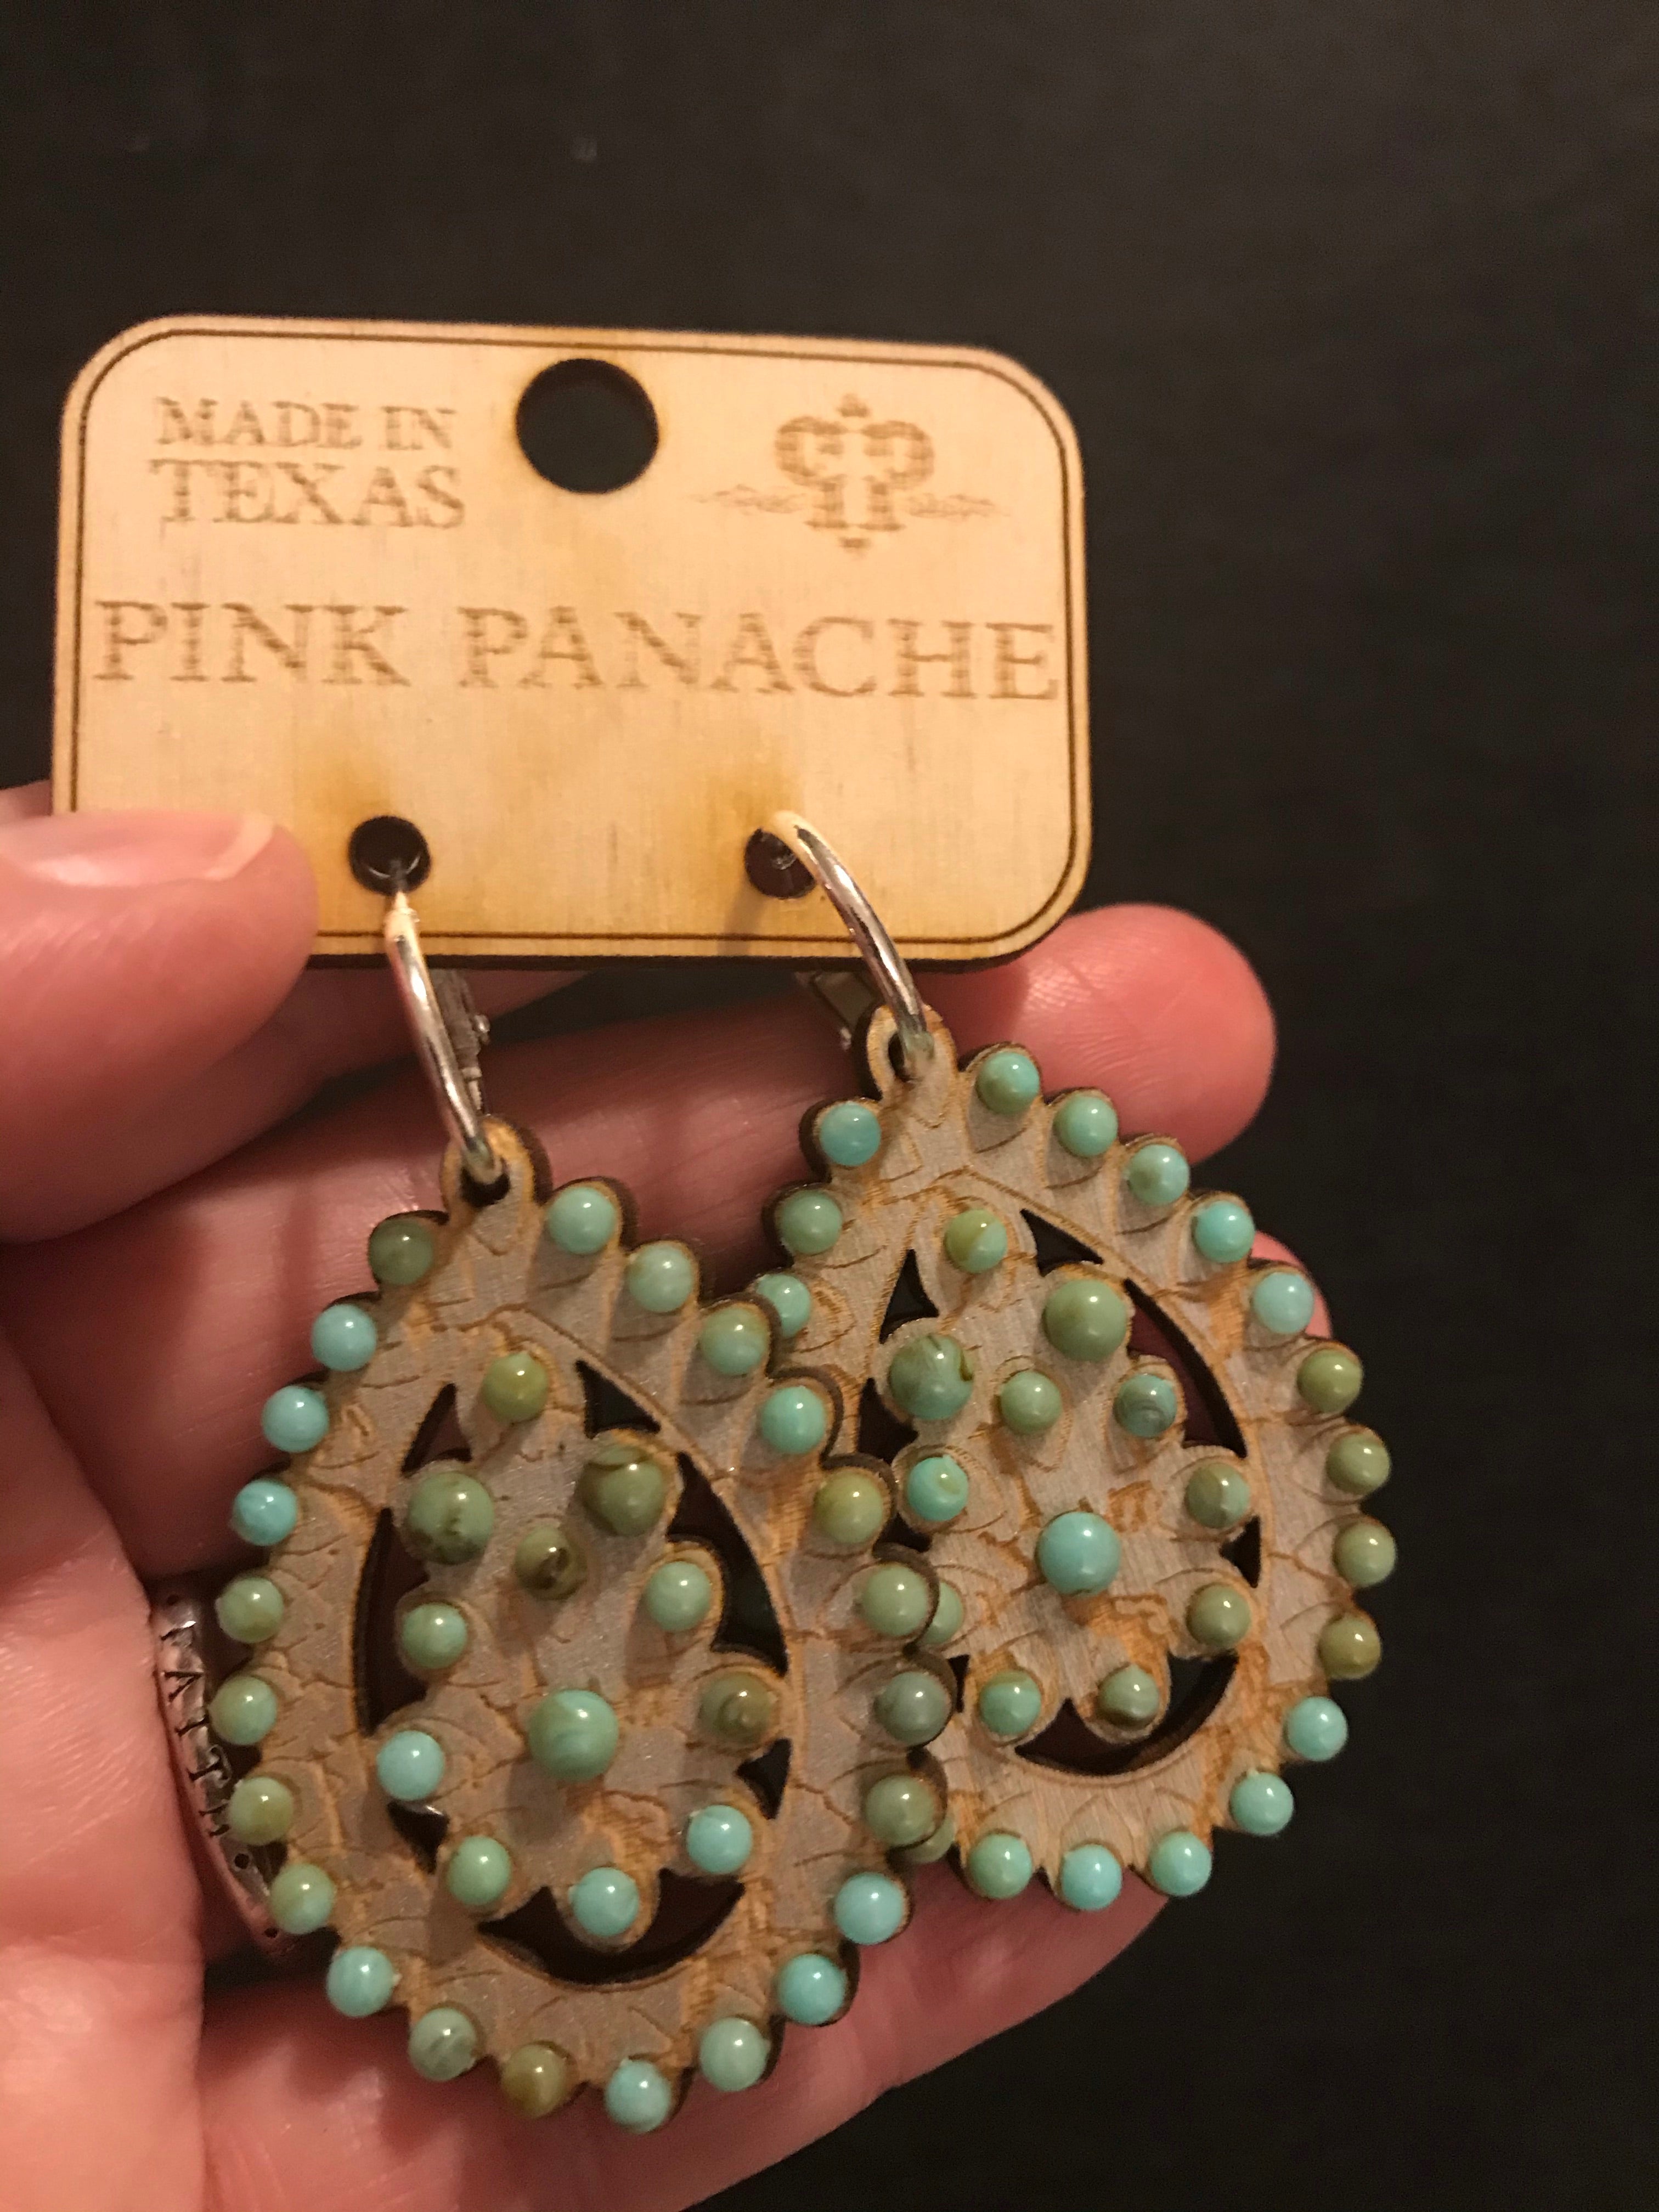 Small Santa Fe Crackle Wood with Turquoise Pink Panache Earrings